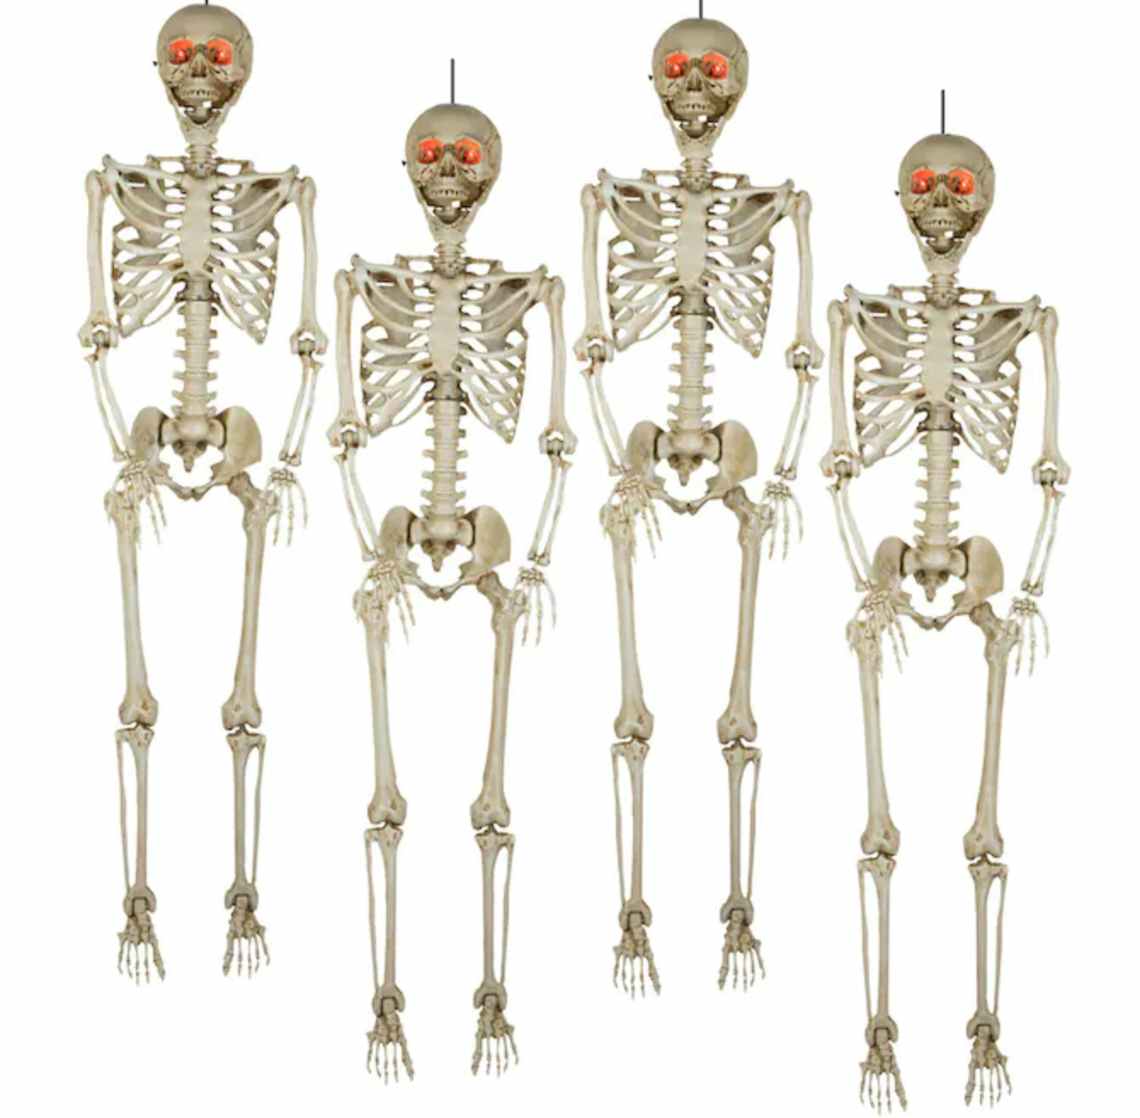 stock photo of four plastic skeletons hanging in front of white background